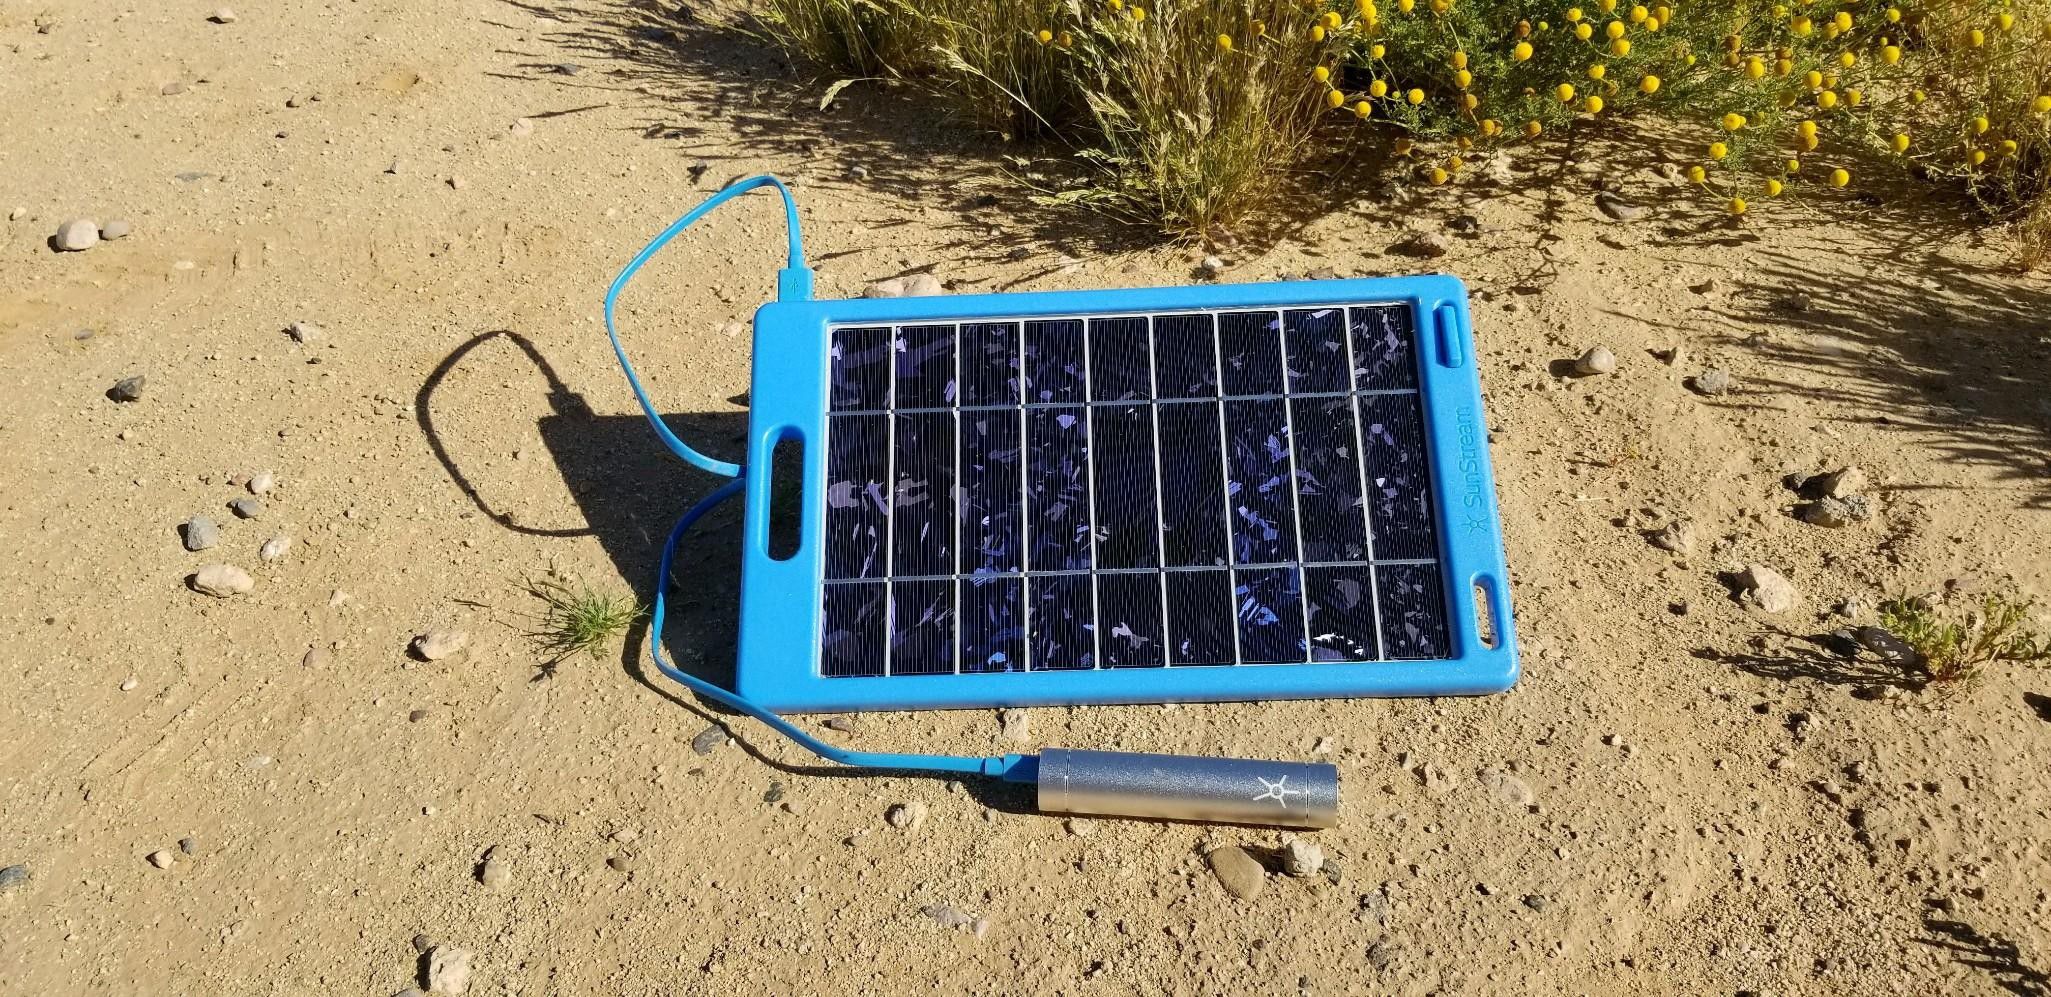 solar panel/charger and flashlight 5 for $20